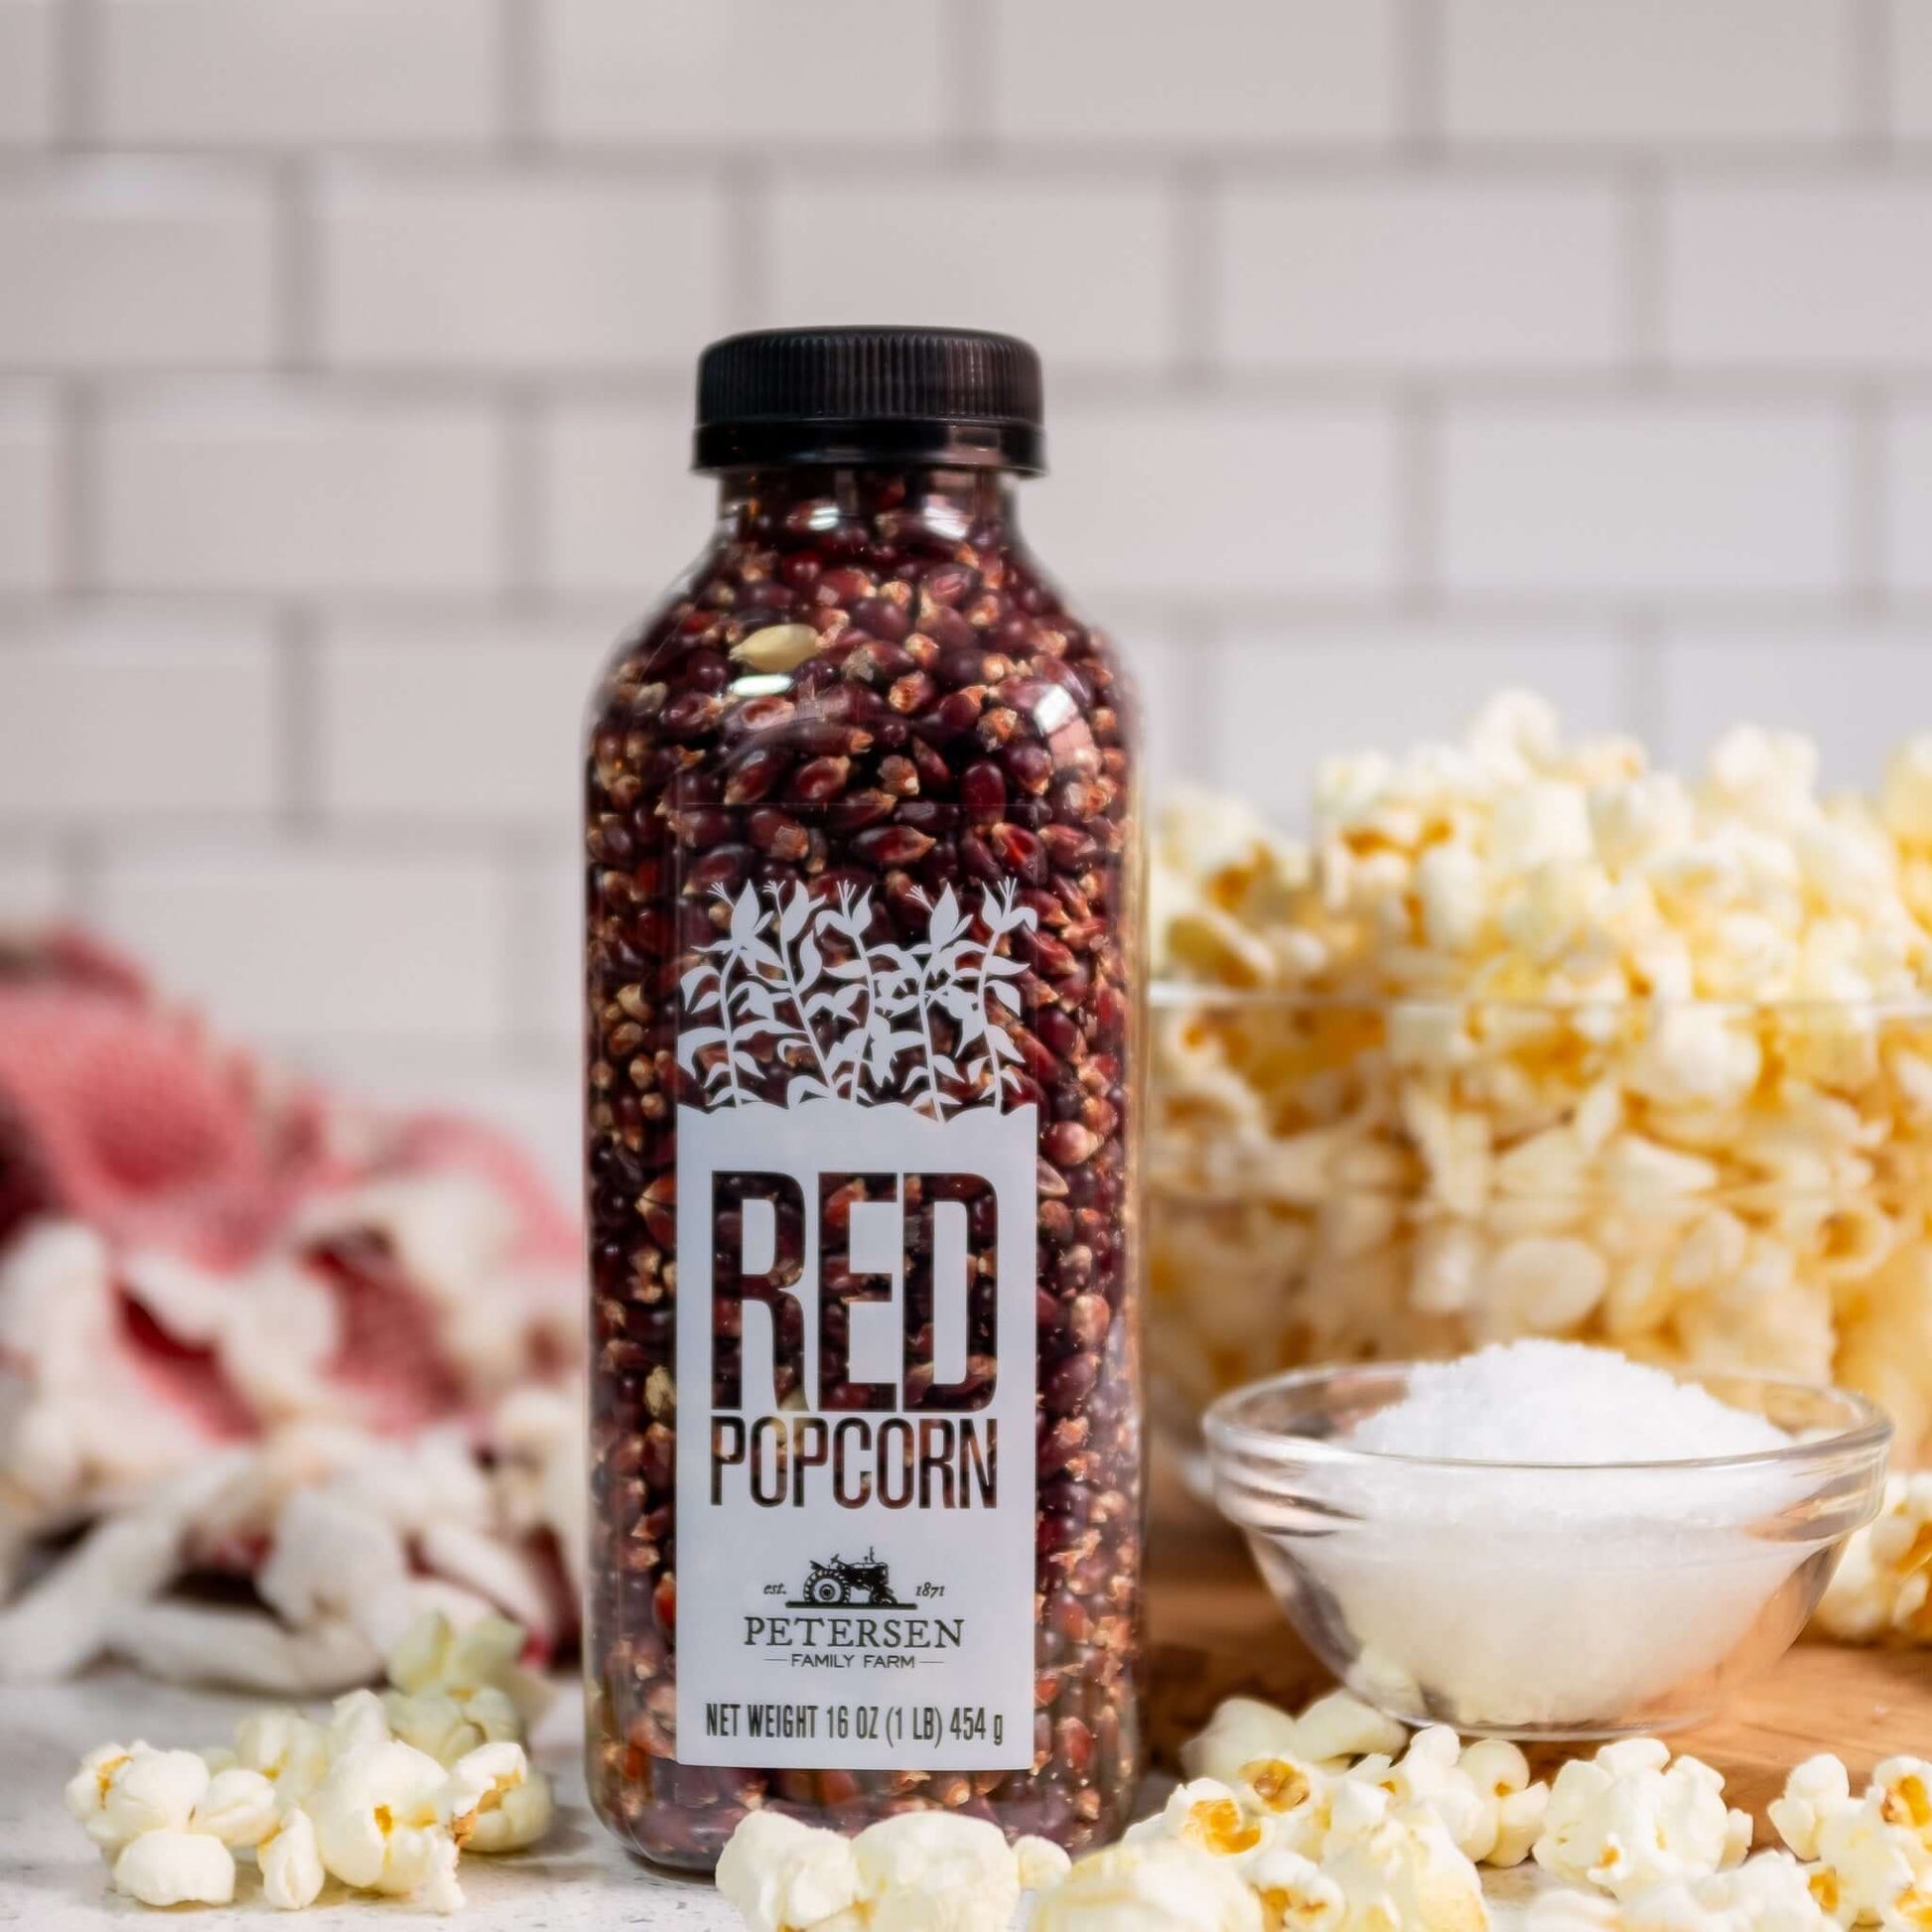 Red popcorn kernels by Petersen Family Farm. 16oz Plastic bottle on counter with popcorn